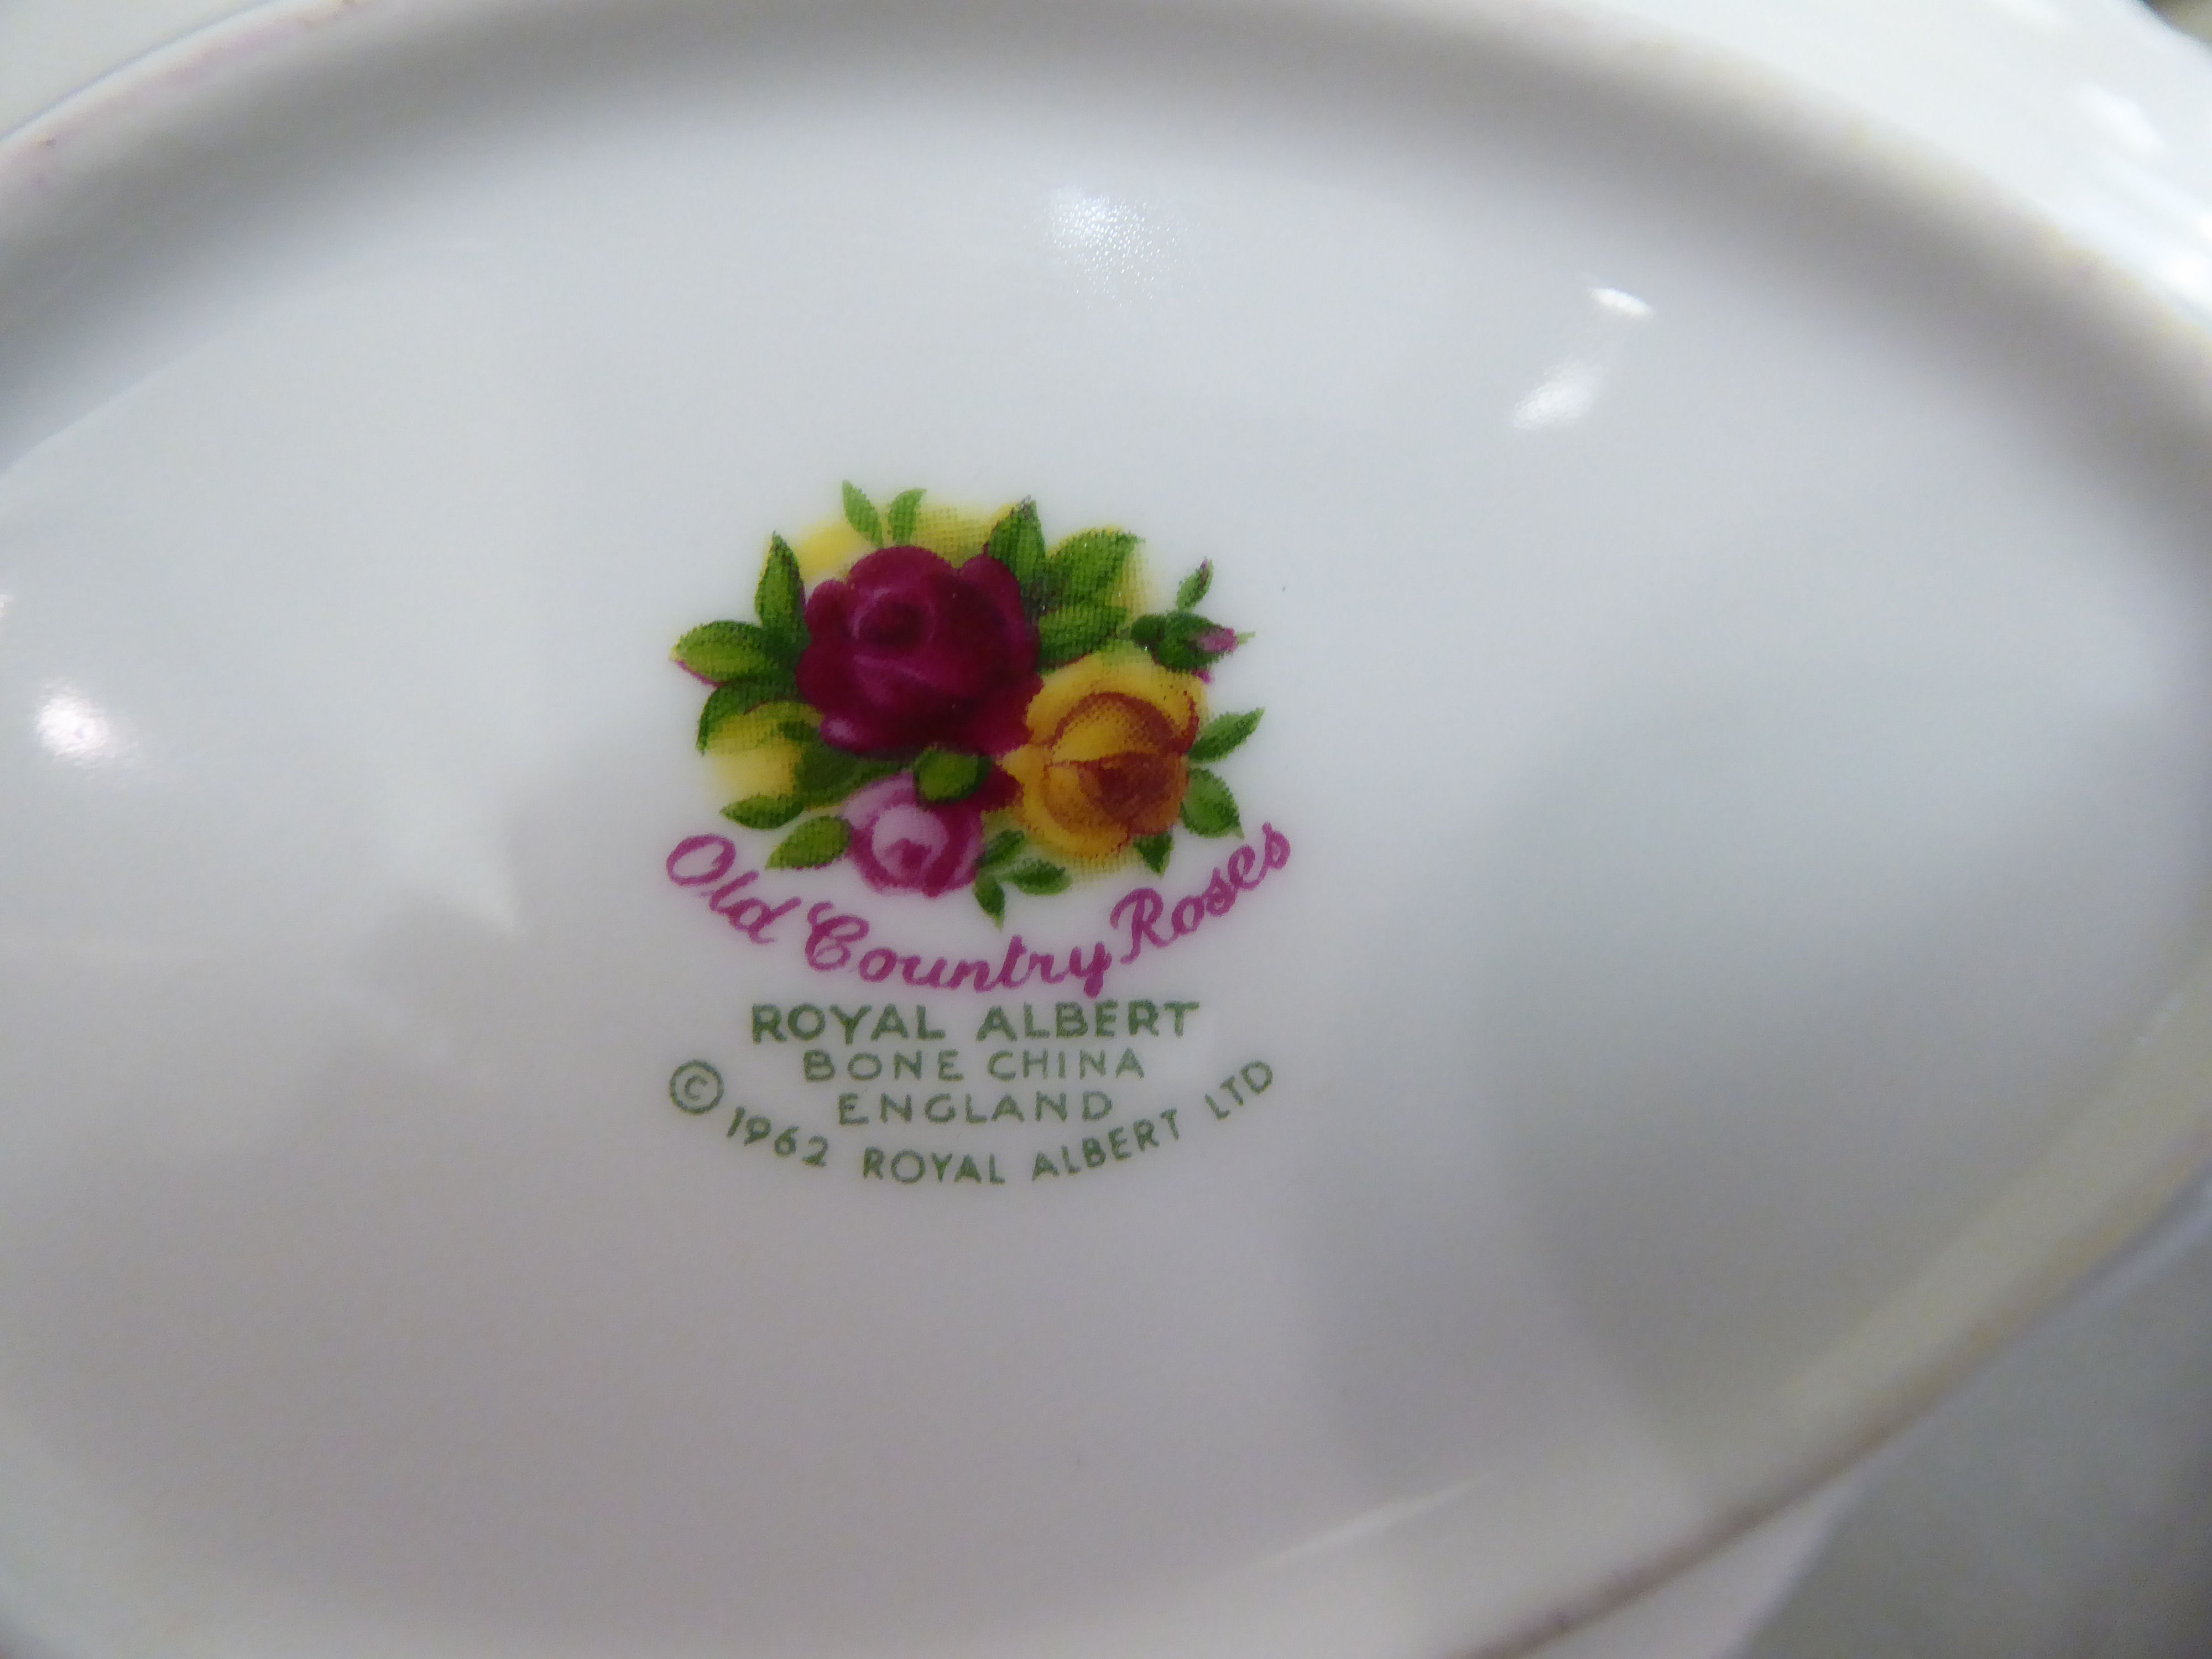 Royal Albert bone china Old Country Roses pattern tea/tableware (First and Second Edition) - Image 2 of 2